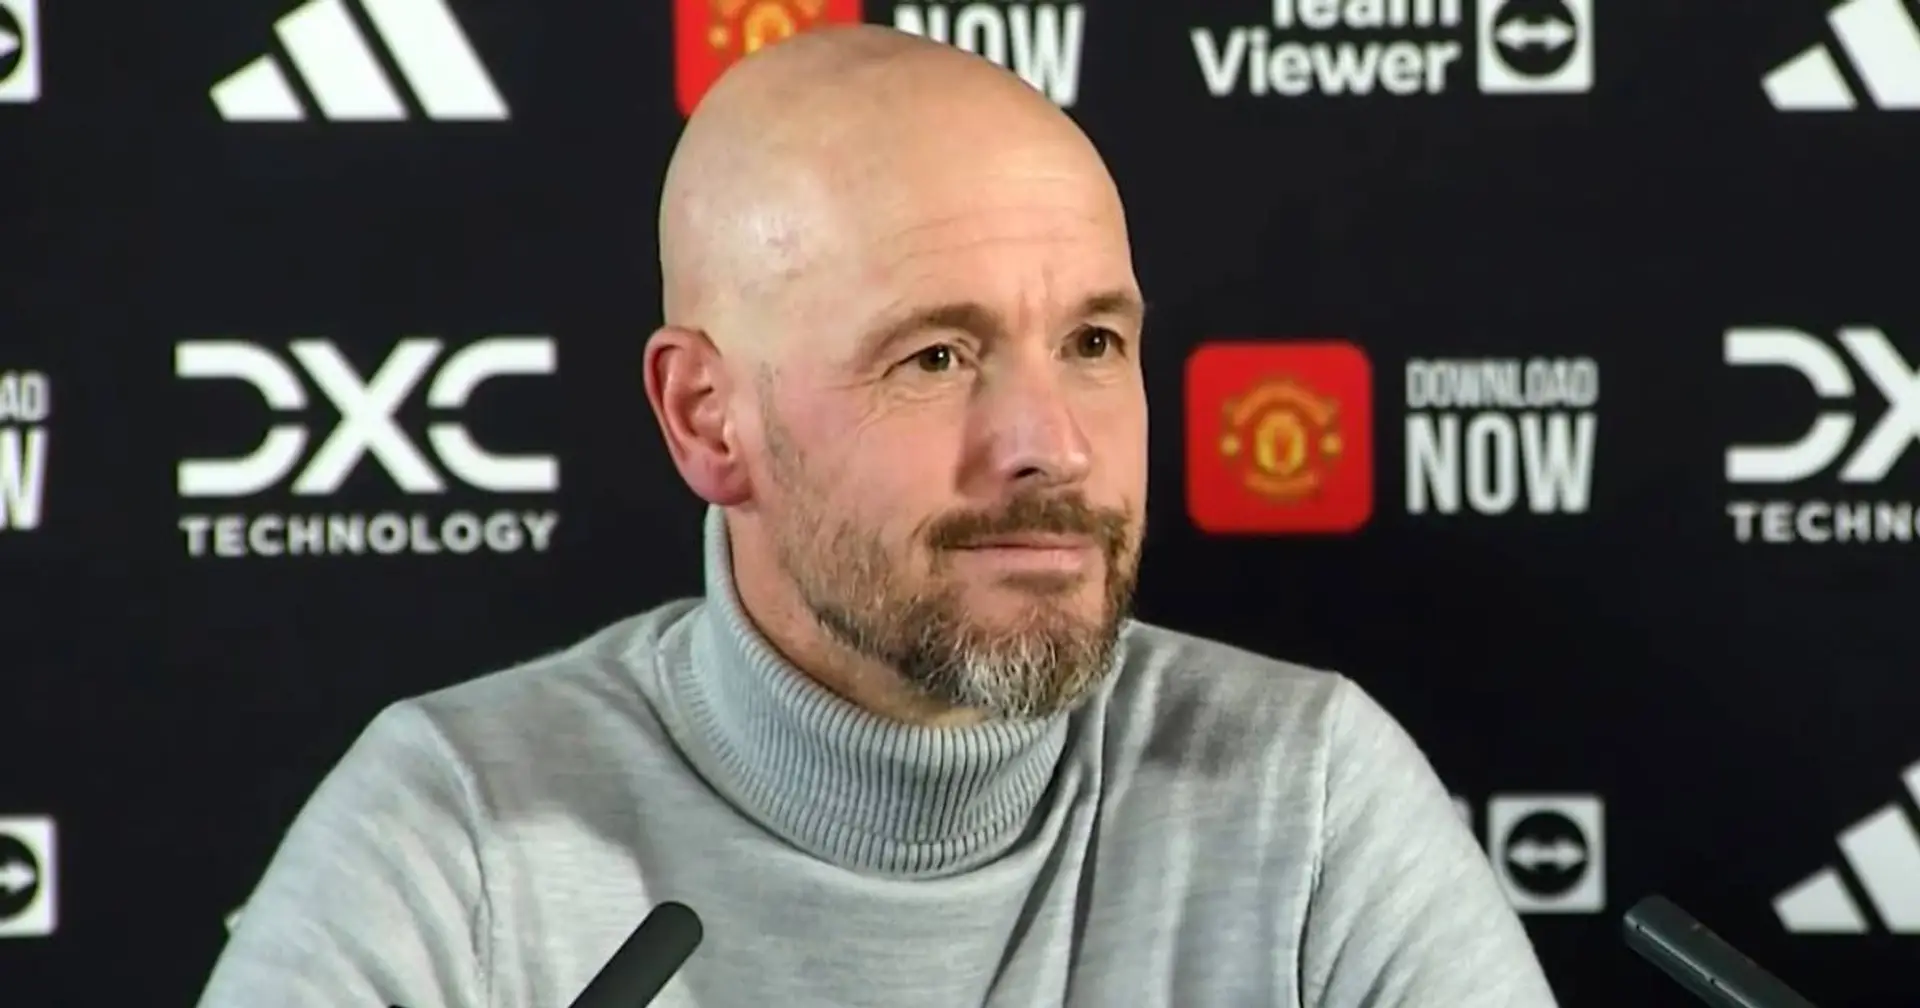 Erik ten Hag: 'I would have easily won 75% of Man United games if not for injuries' 